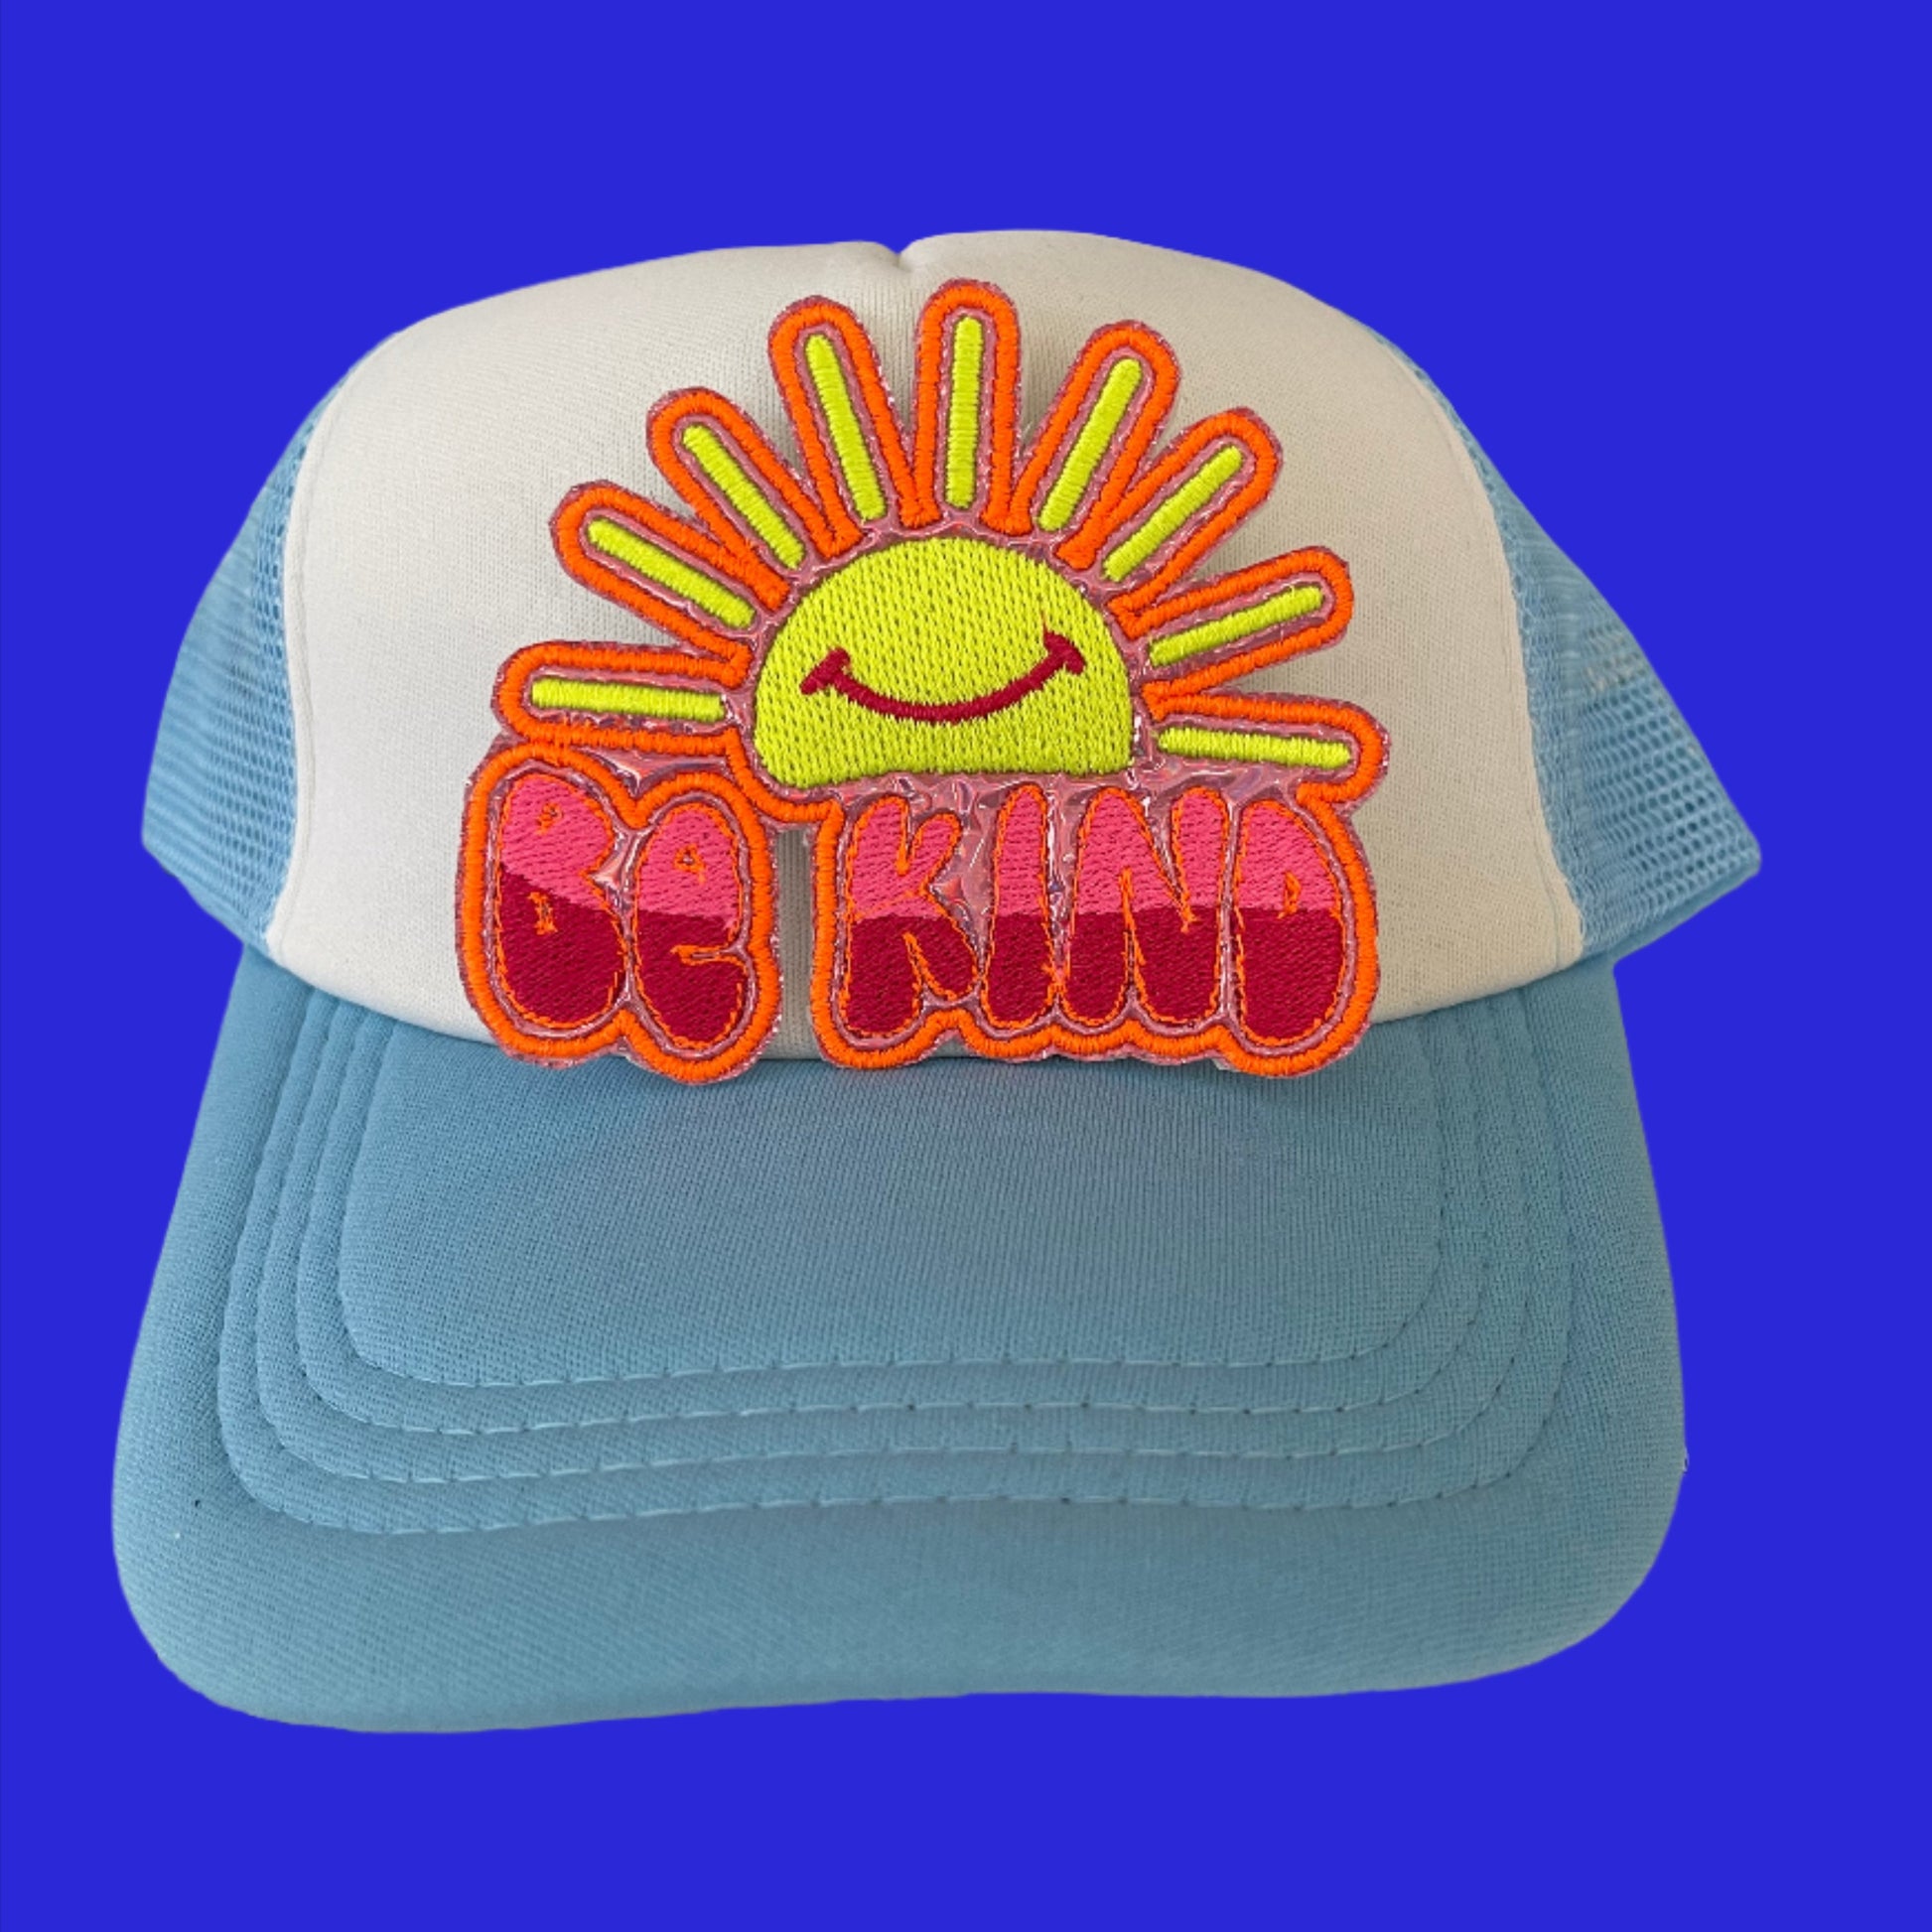 Iron-on patch featuring a cheerful sun with a smiling face, embroidered in bright yellow and outlined in neon orange, with the phrase "BE KIND" in two-tone pink and outlined in neon orange.